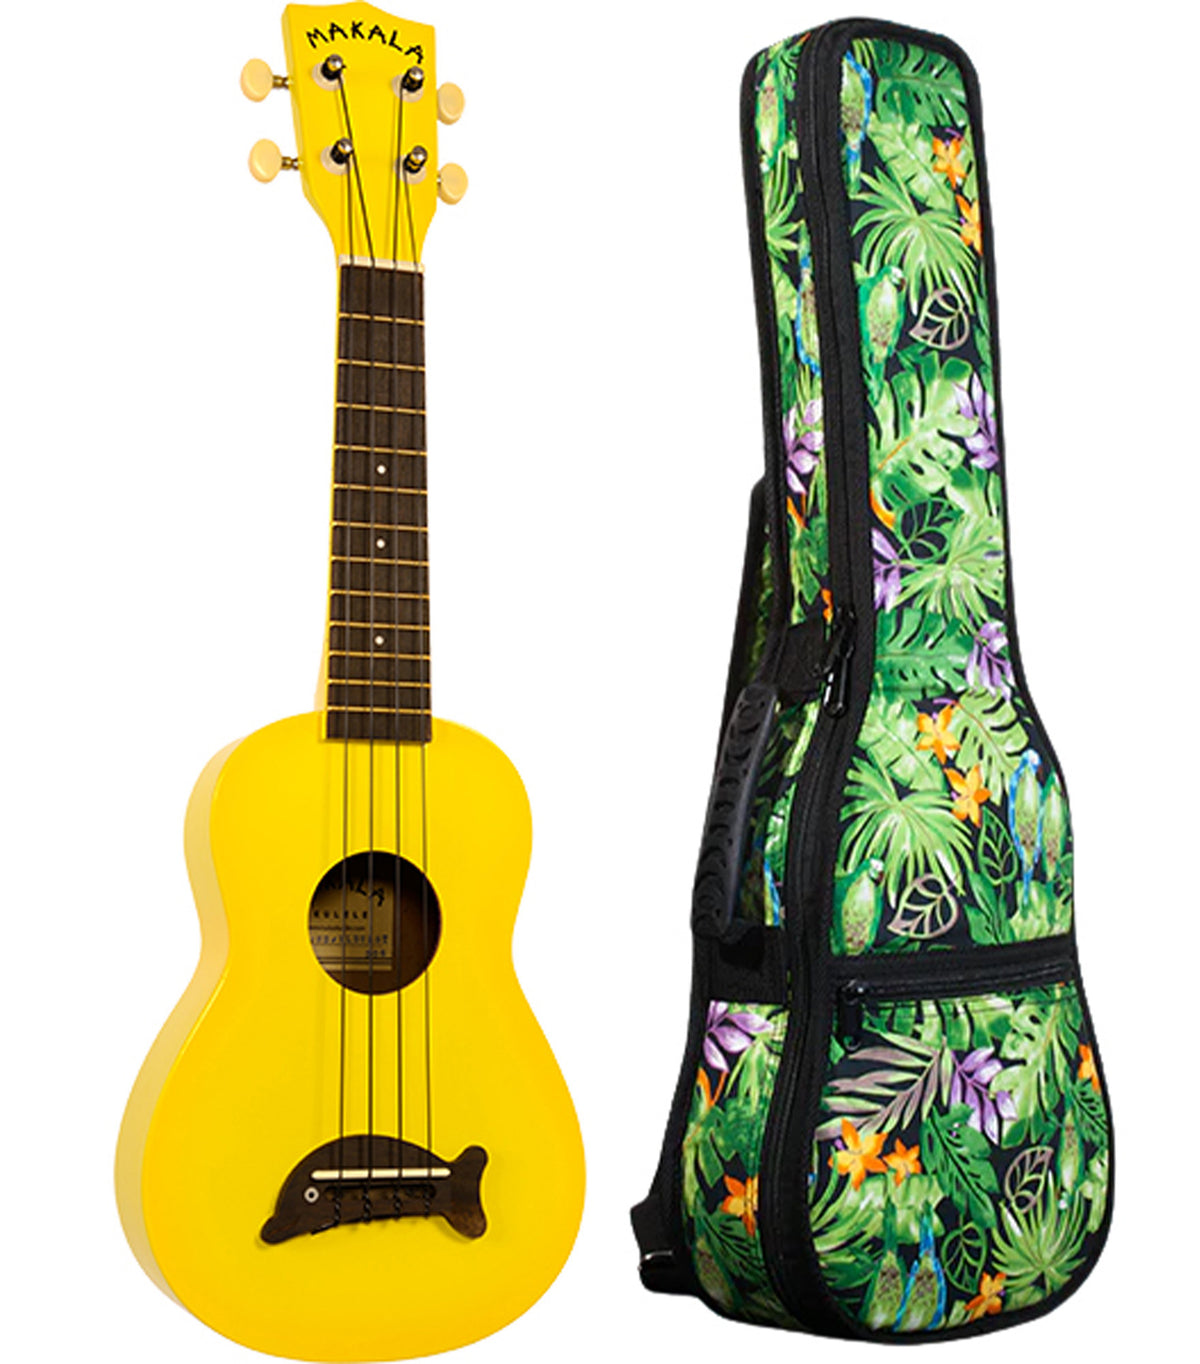 MK-SD/YL Yellow Soprano Dolphin Ukulele Includes Gigbag Floral Print, Padded with Backpack Straps